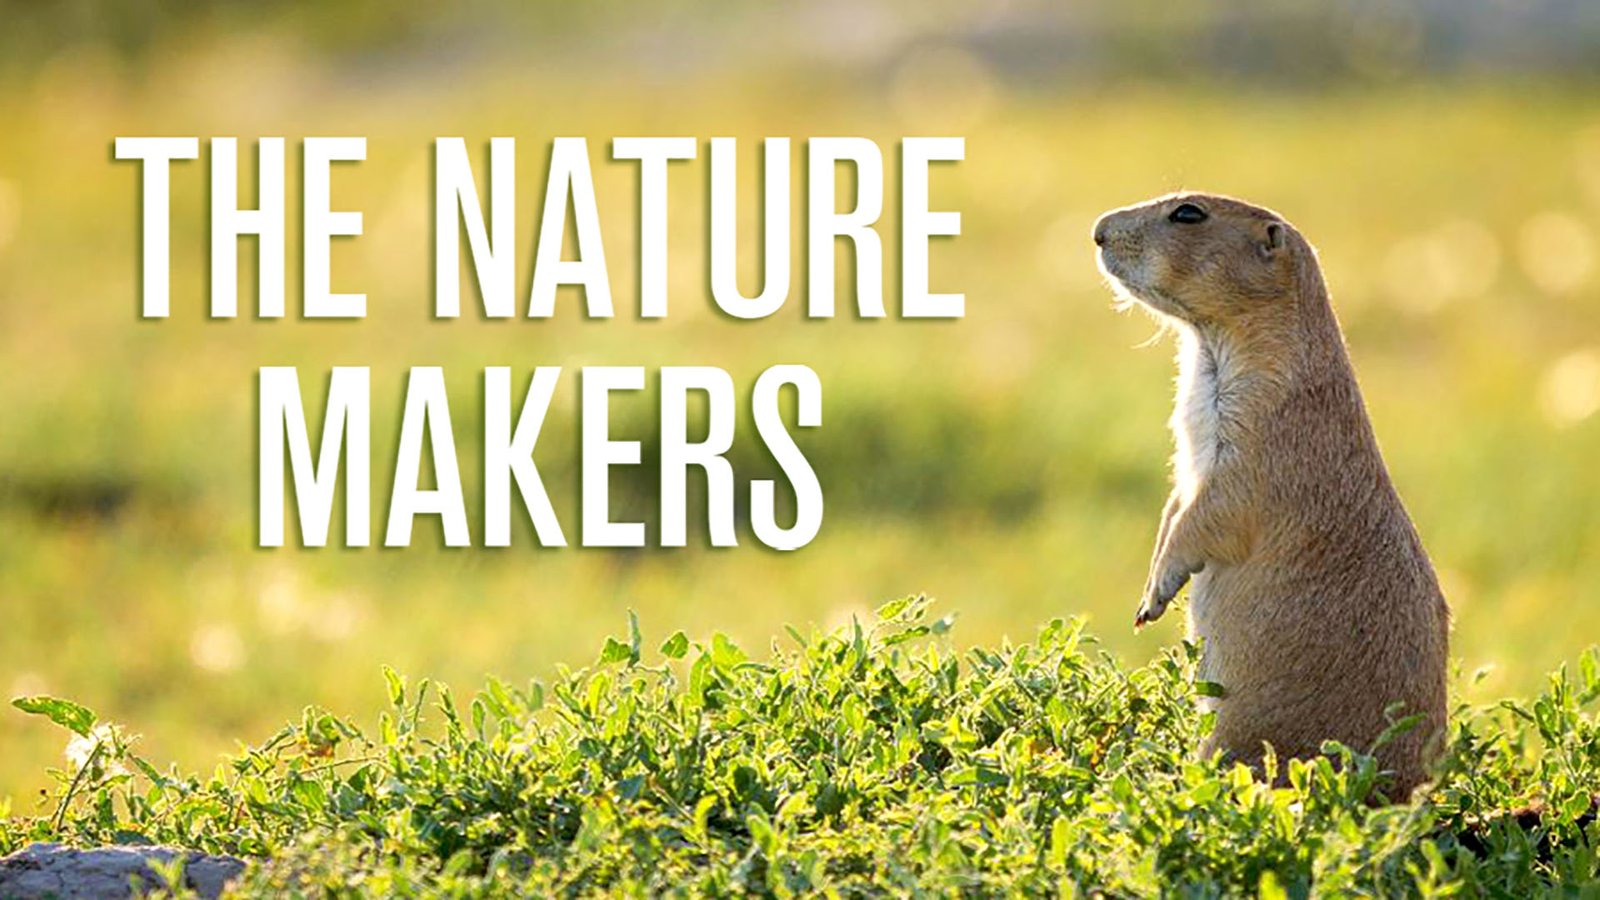 The Nature Makers